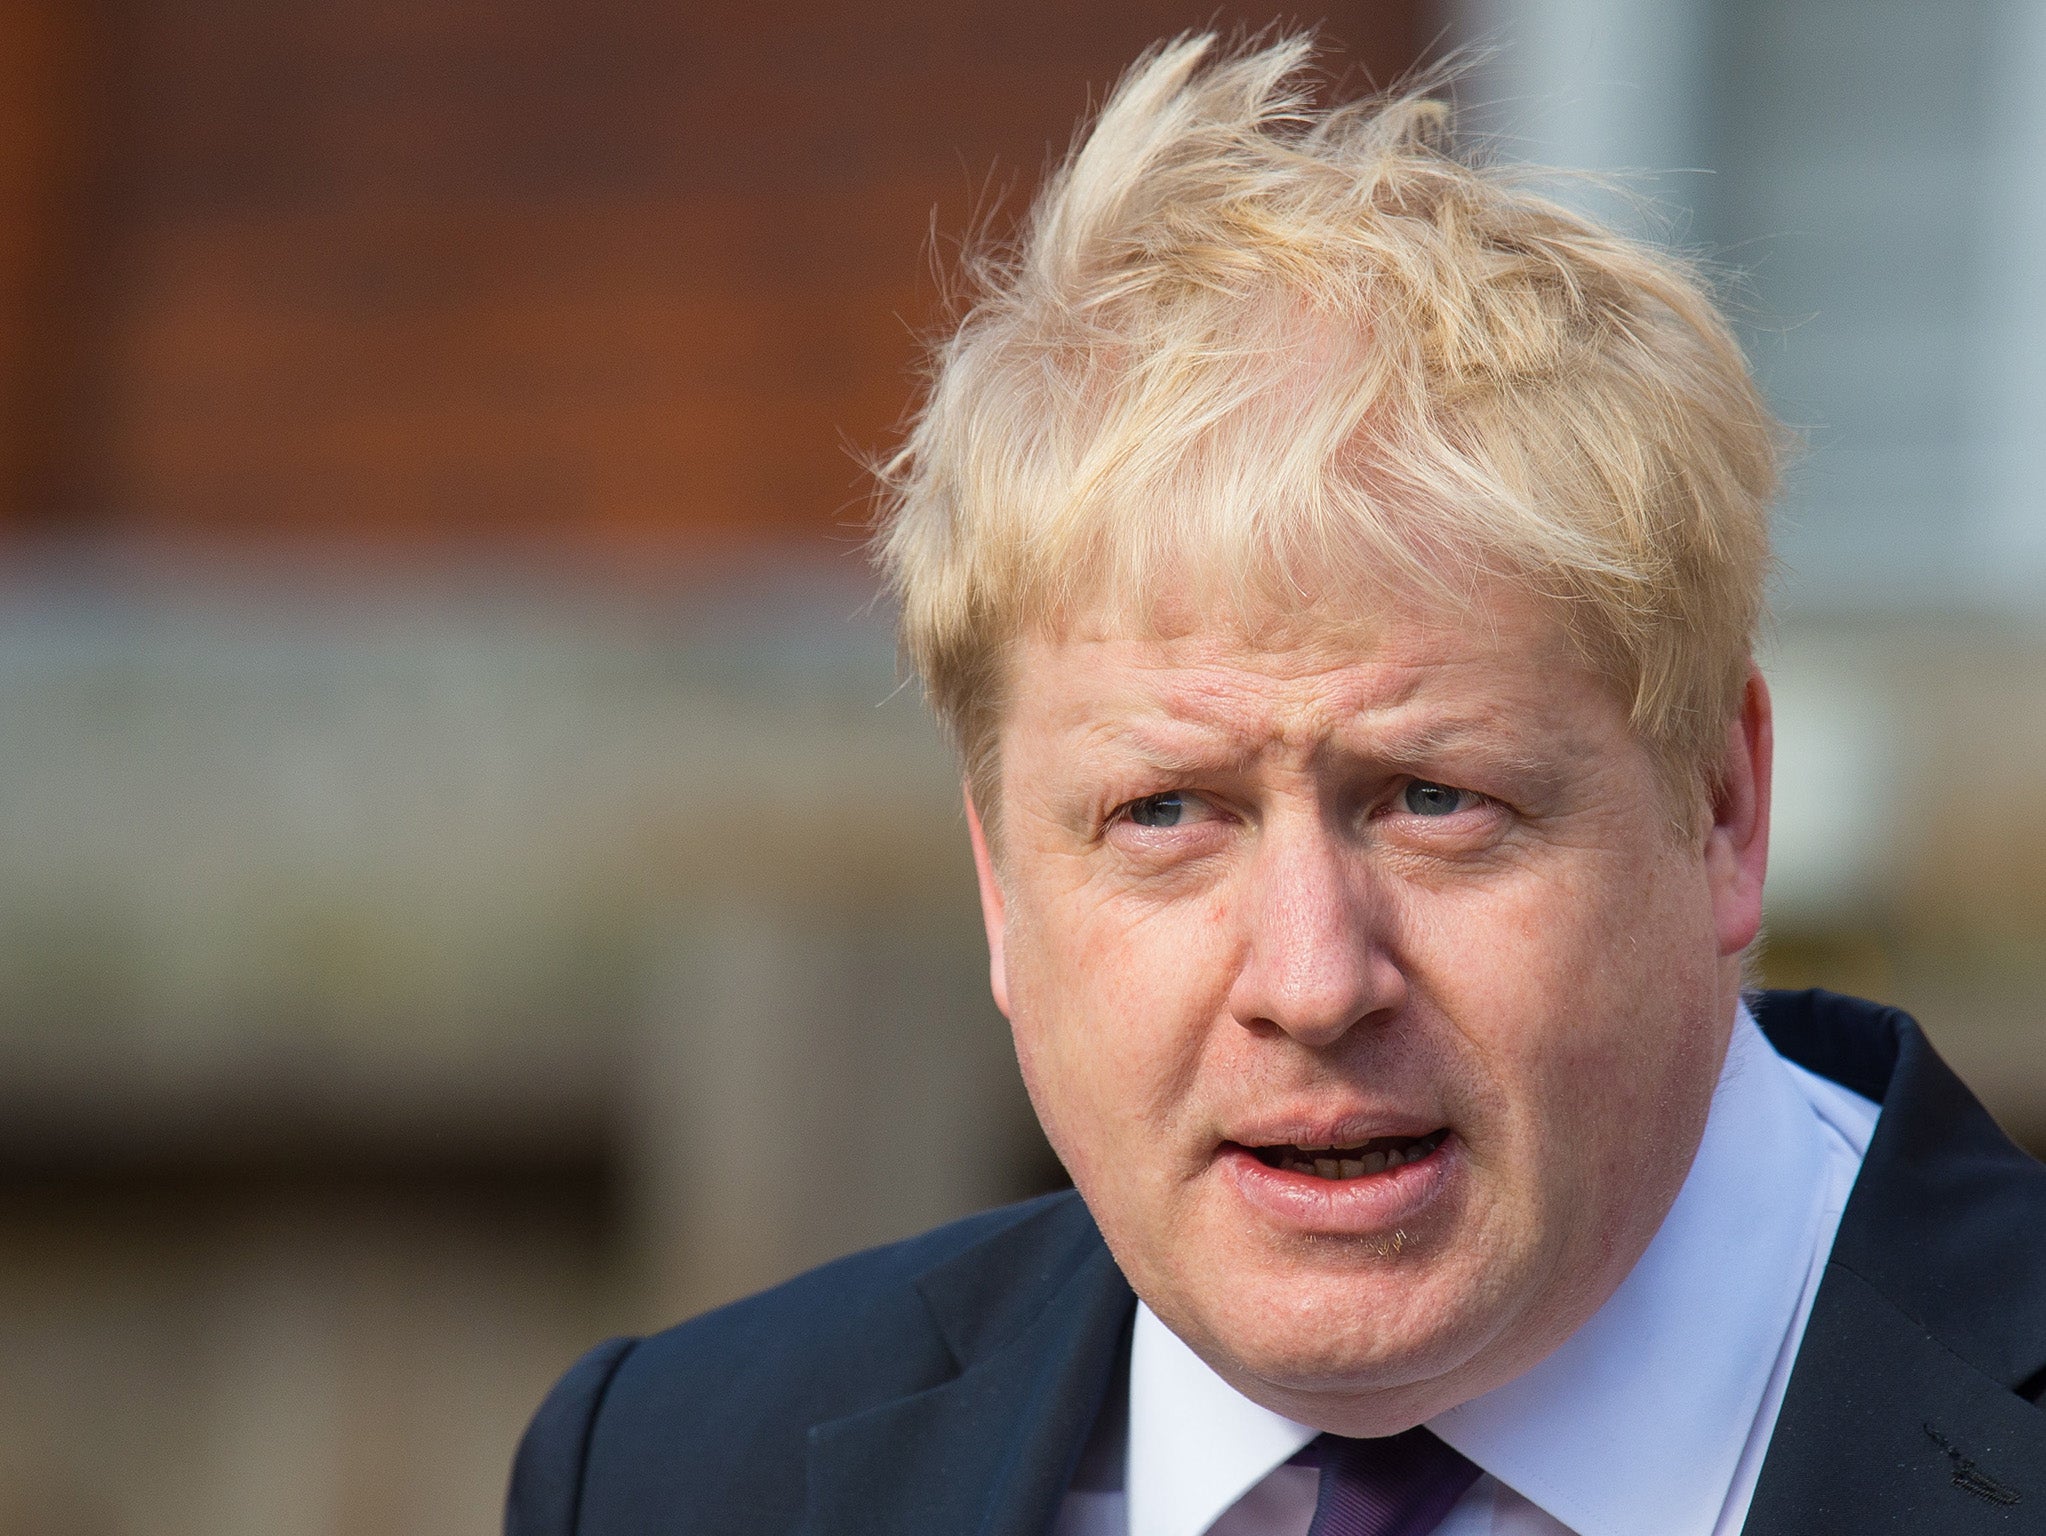 Mr Johnson said the US President's attitude to Britain might be based on his 'part-Kenyan' hertiage